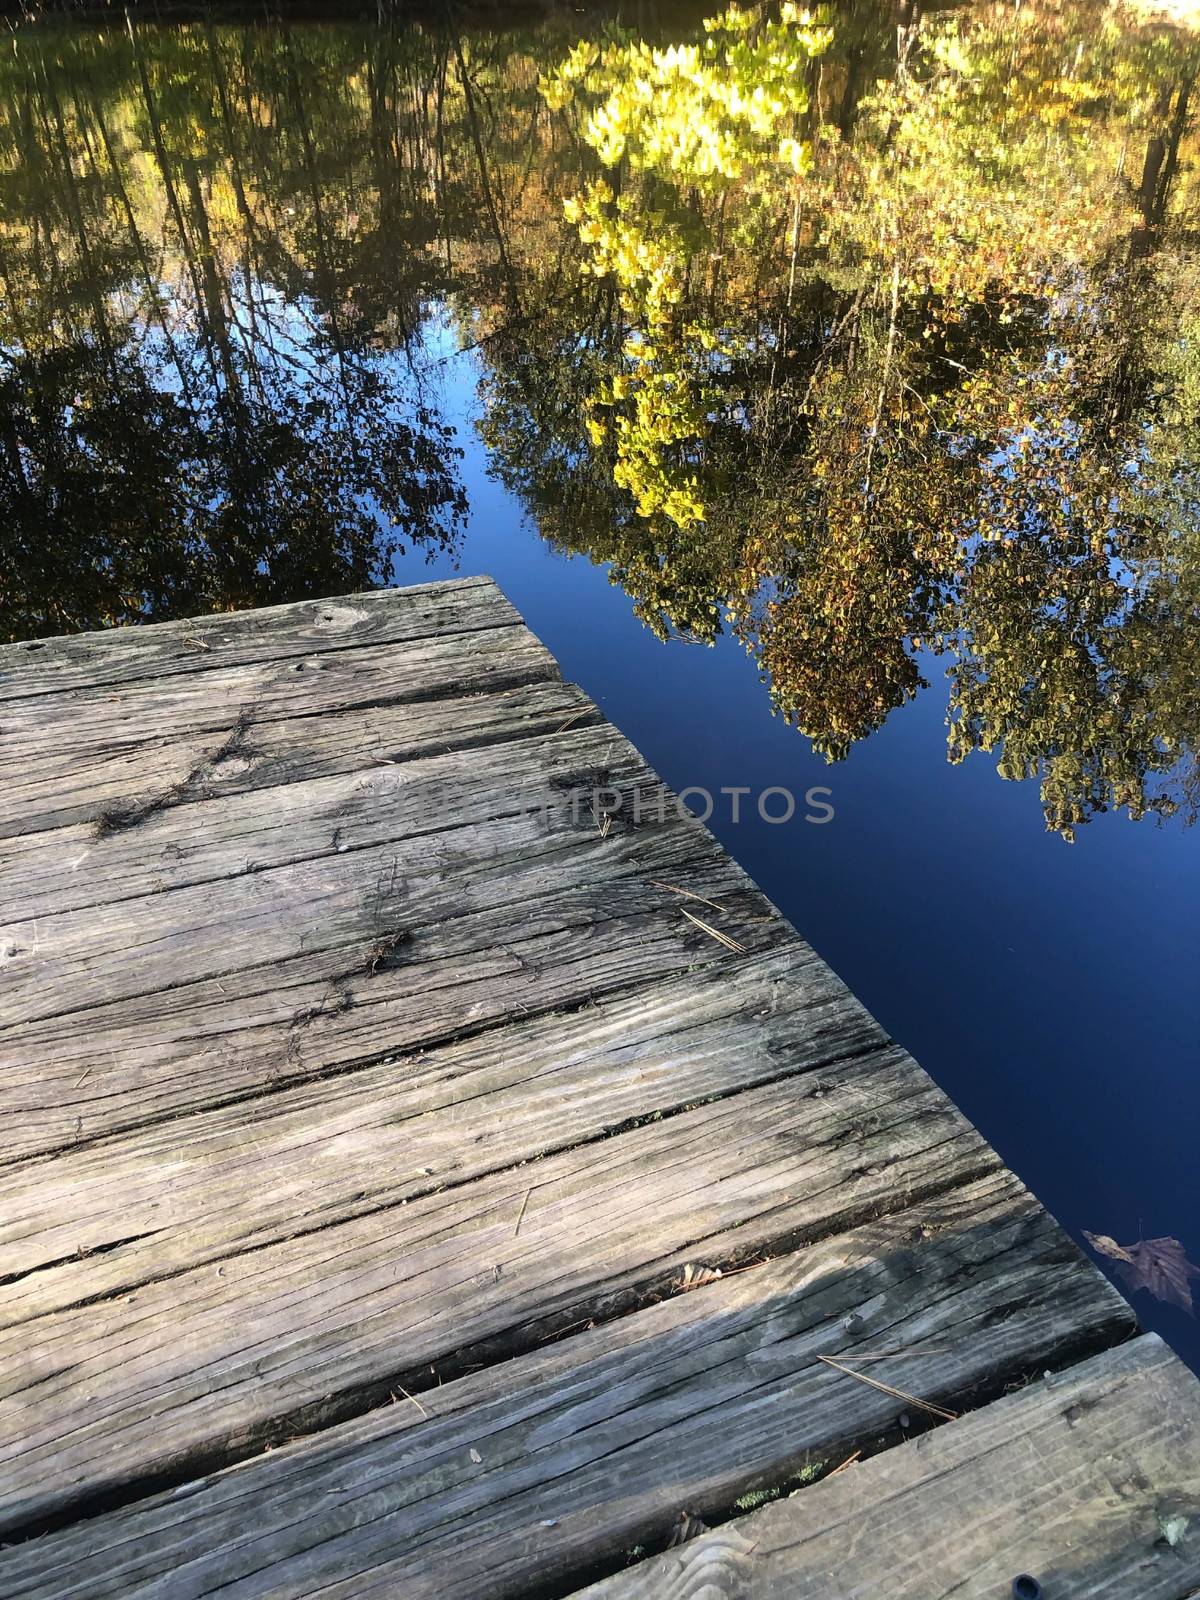 Wooden dock juts into tranquil forest lake reflecting trees. by marysalen